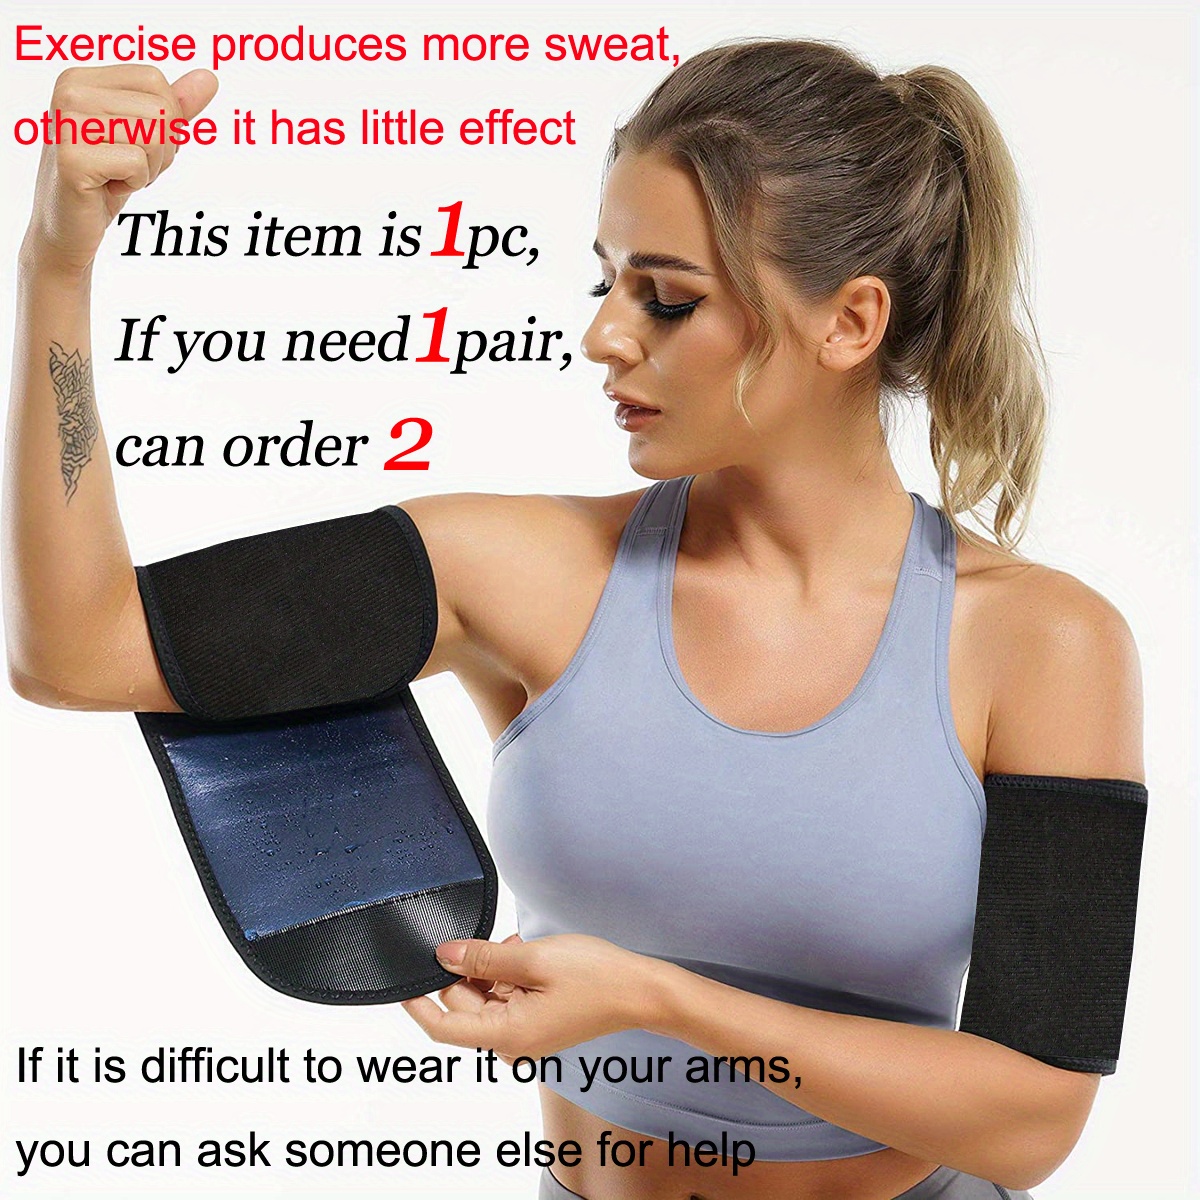 1pair Unisex Sports Fitness Arm Sleeves, Sauna Sweatband For Slimming Arms, Arm  Shaper, Arm Slimmer, At-home Arm Workout Equipment